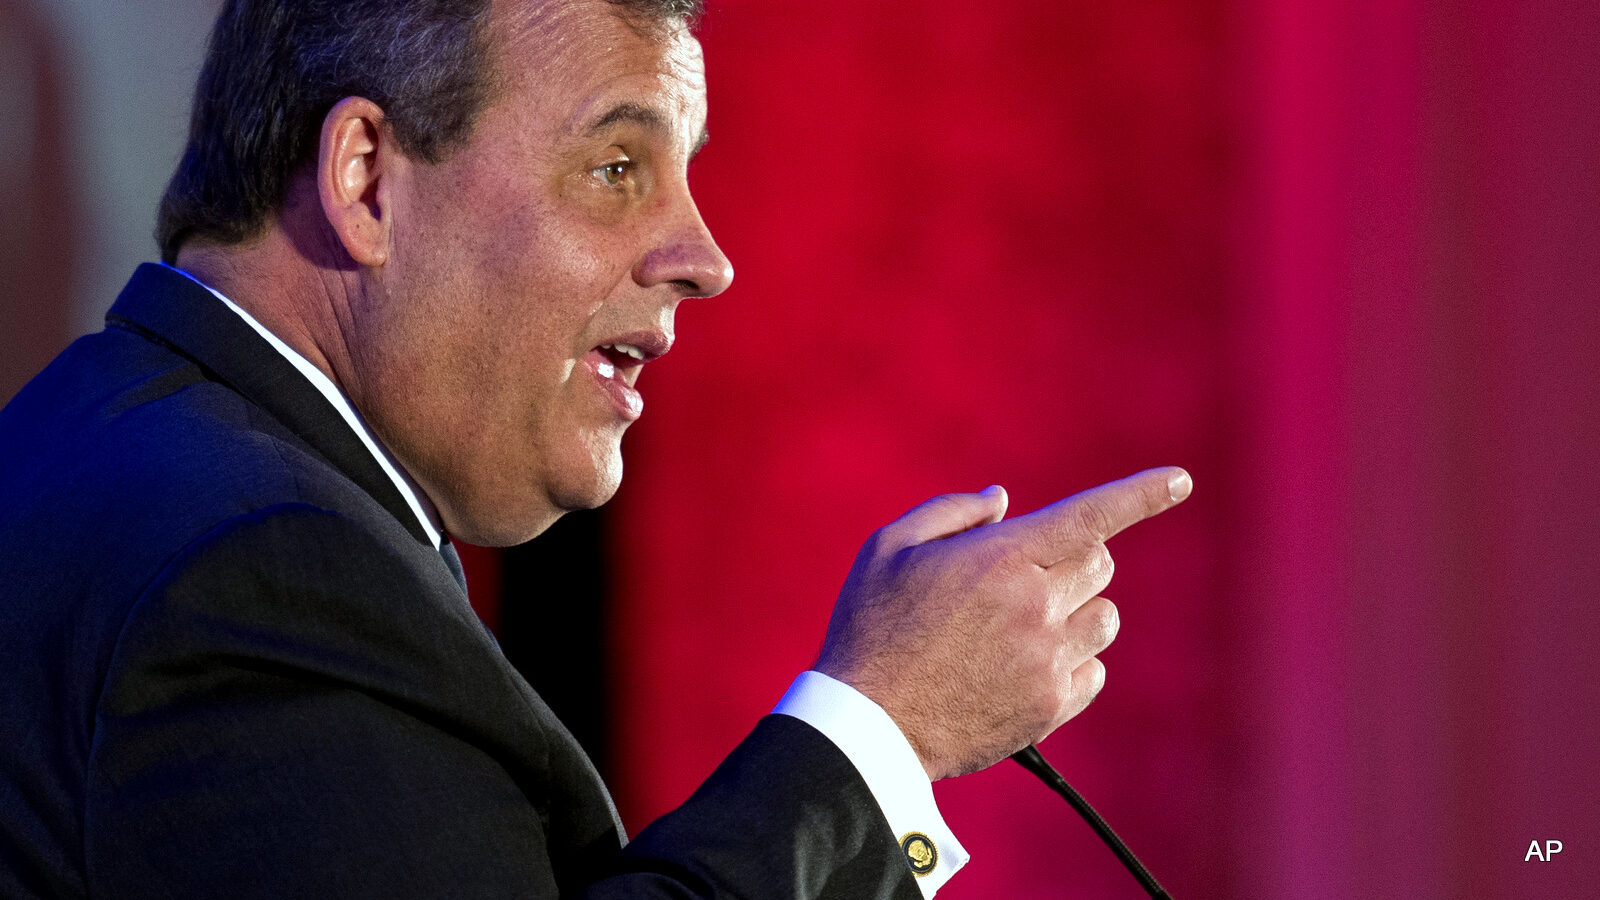 N.J. Gov. Chris Christie gestures while speaking at the Northern Virginia Technology Council (NVTC) in Tyson's Corner, Va., Friday, May 1, 2015. (AP Photo/Cliff Owen)